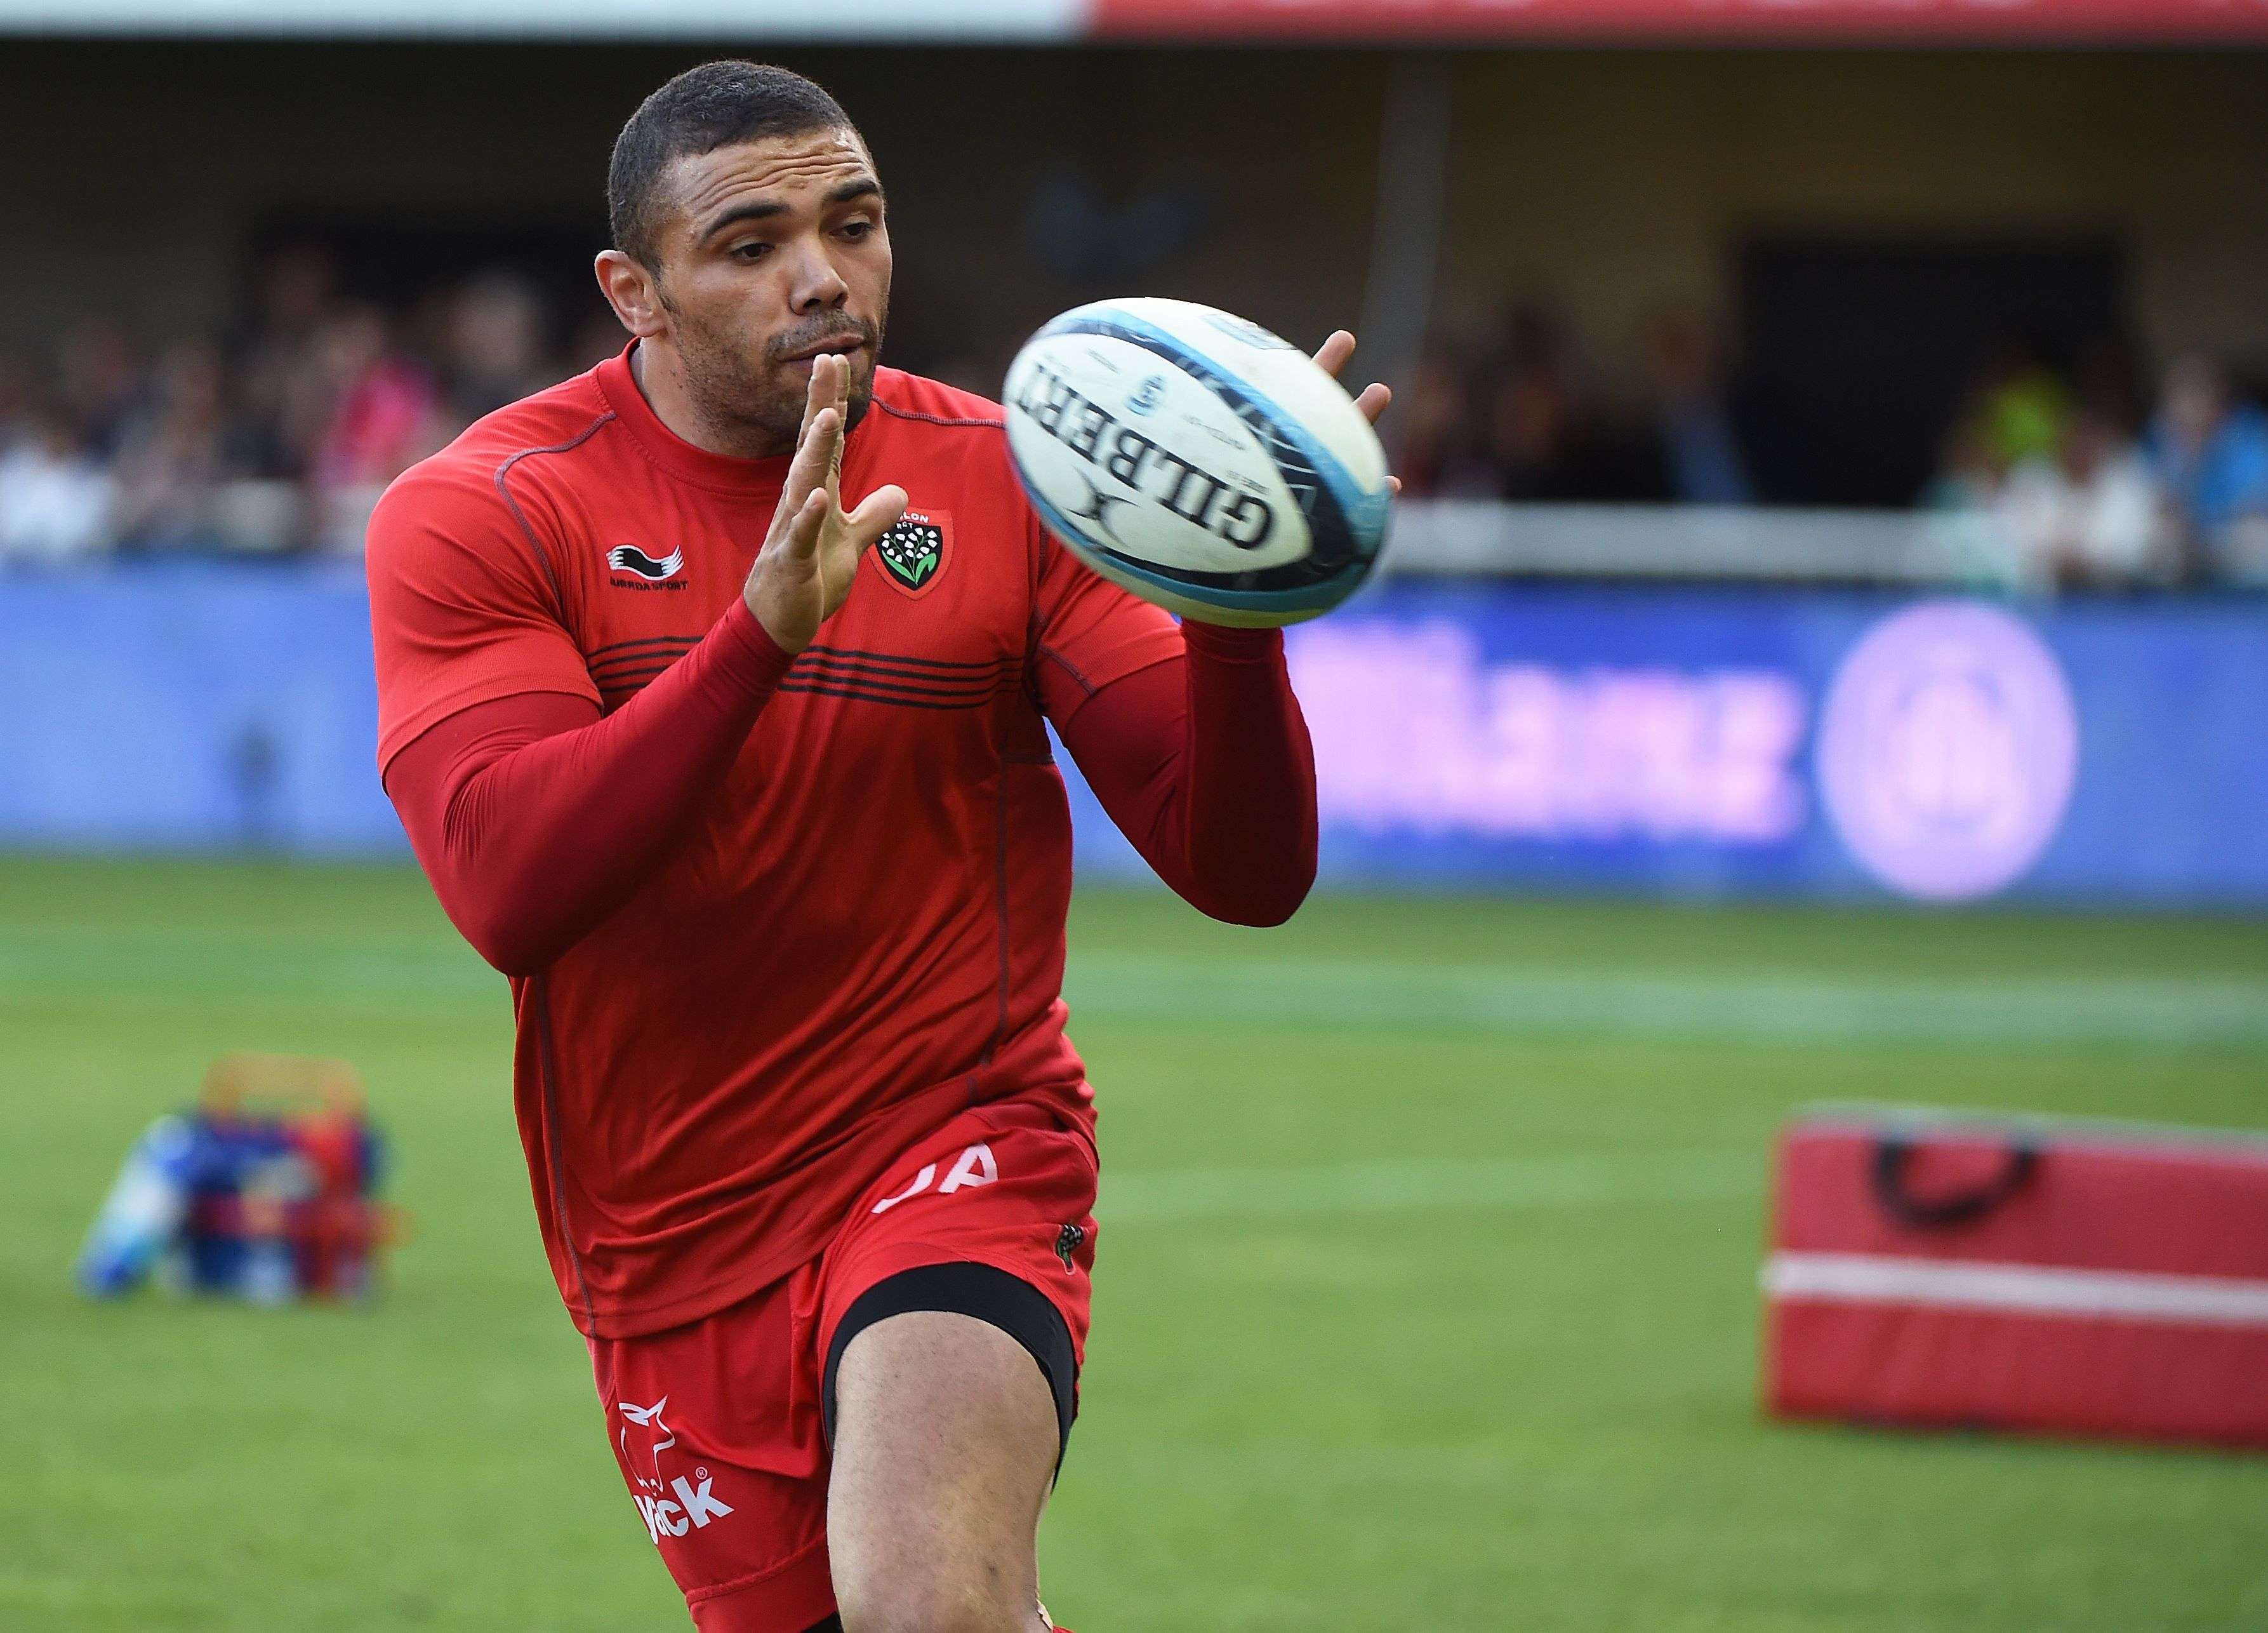 Toulon's South African winger Bryan Habana warms up before a French Top 14 match between Montpellier and Toulon in May. Photo: AFP